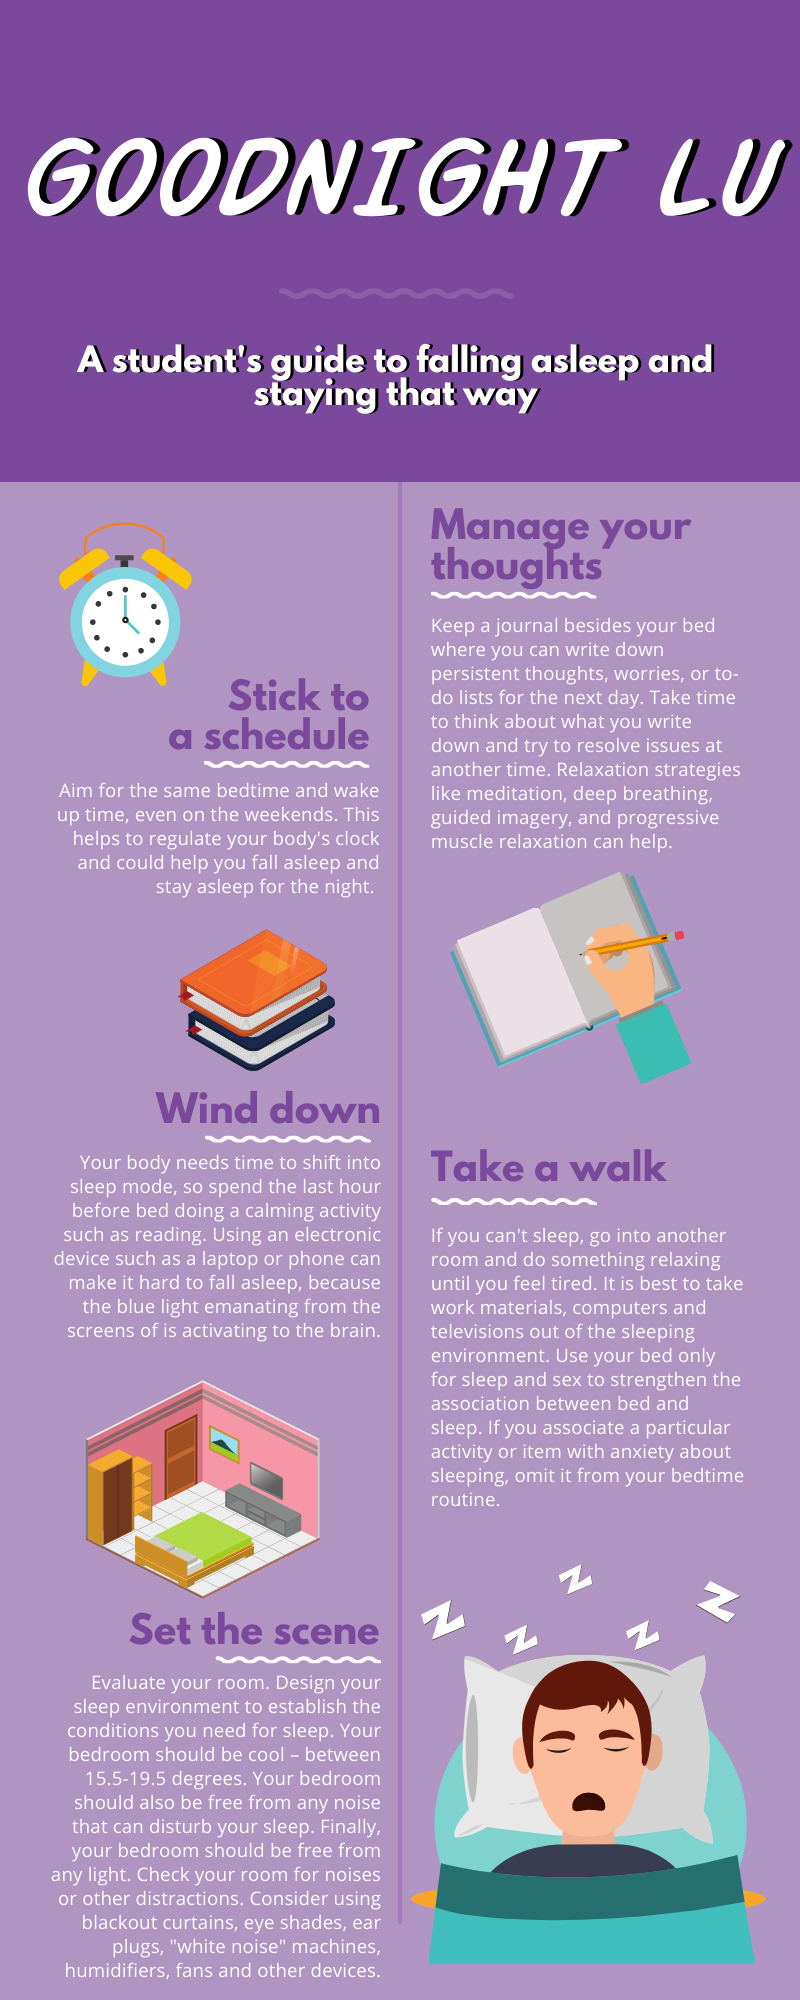 Sleep habits infographic. This is bad to have on our website.